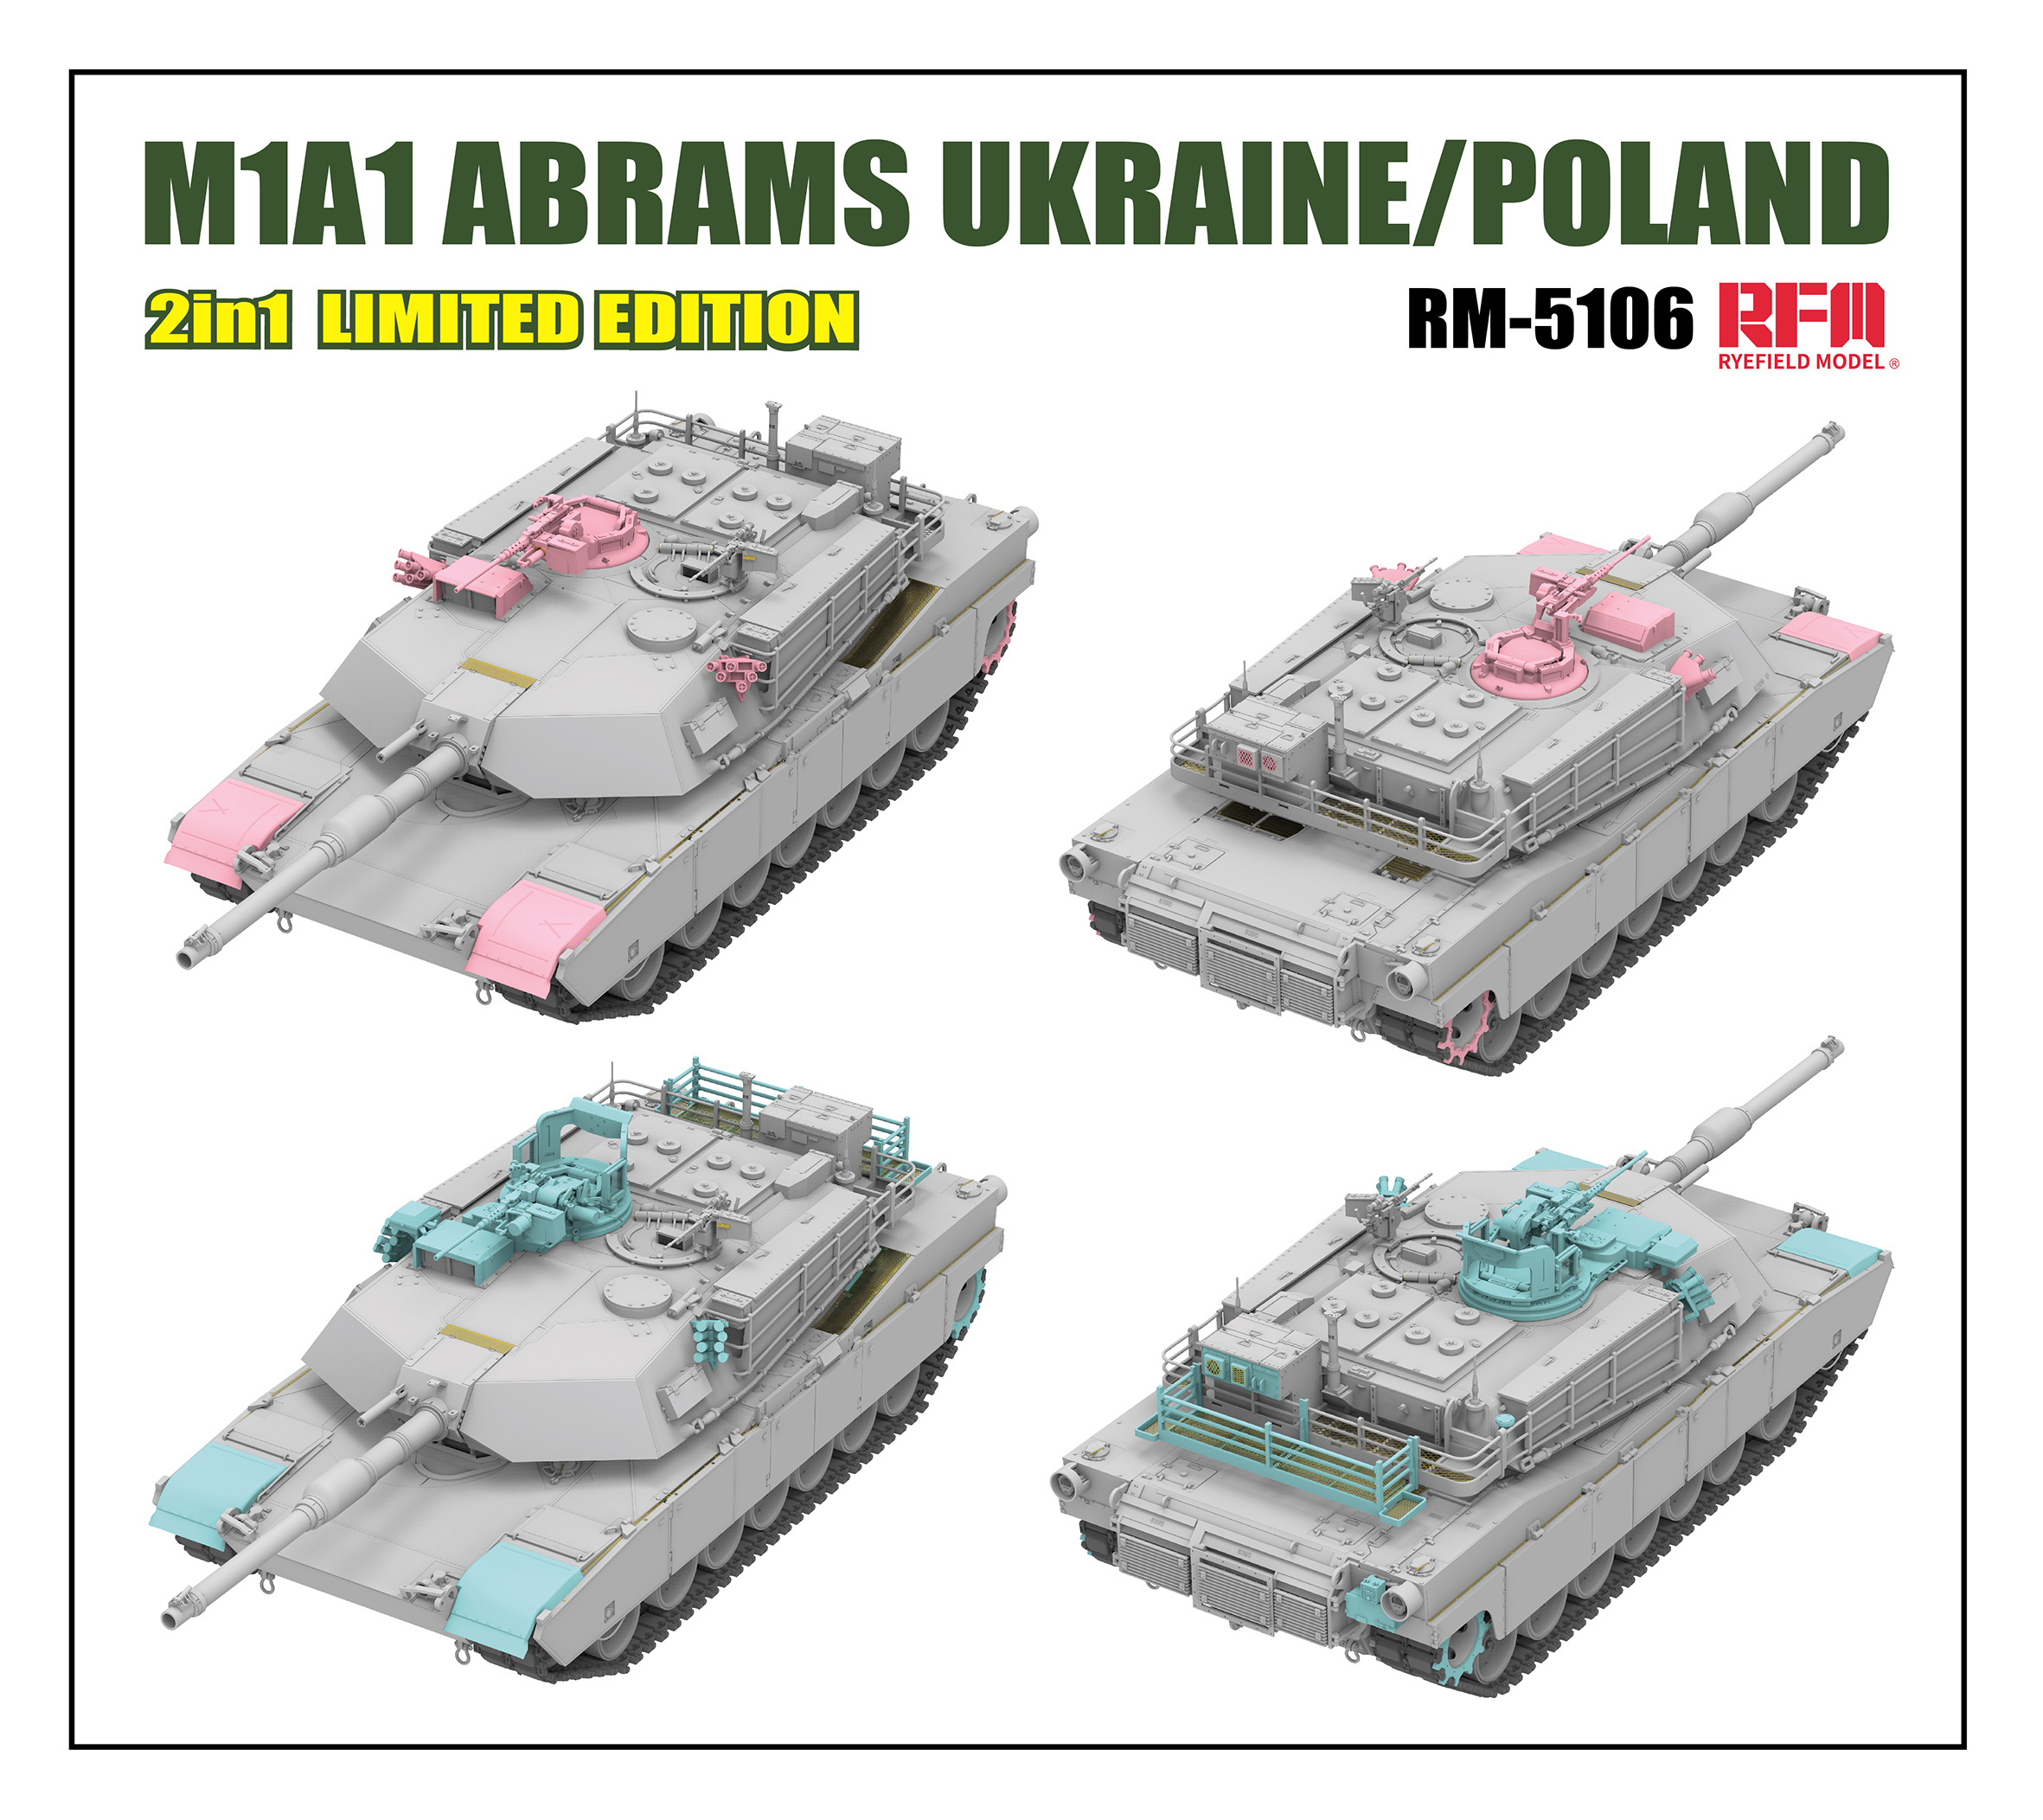 Other. Buy accessories in Kiev. Online store ✯ Abrams ✯